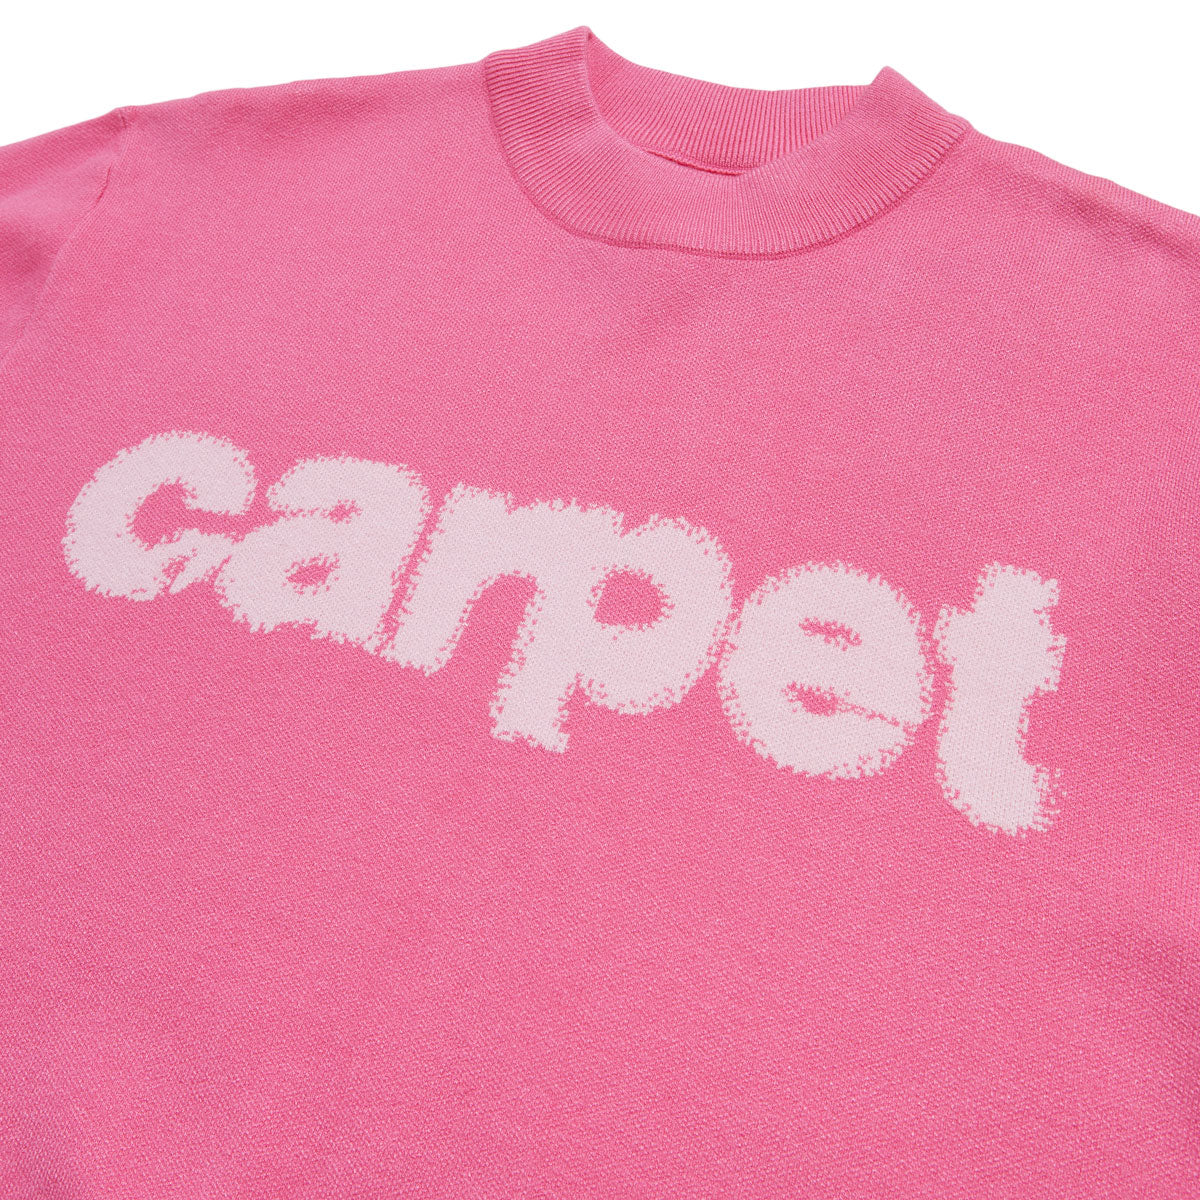 Carpet Company Woven Sweater - Pink image 3